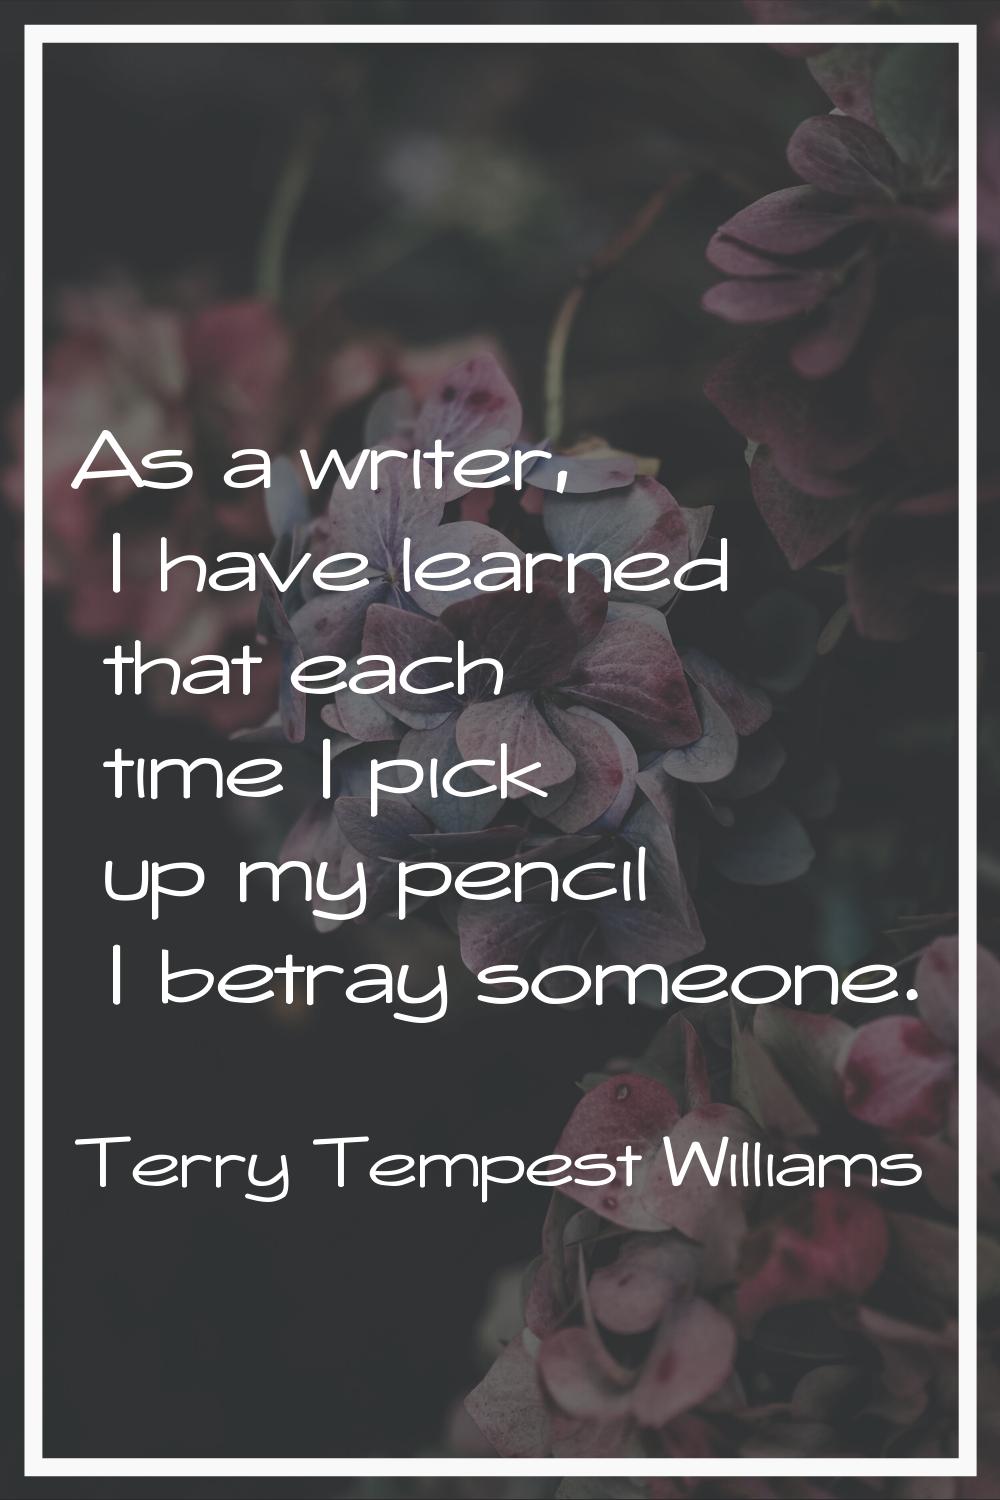 As a writer, I have learned that each time I pick up my pencil I betray someone.